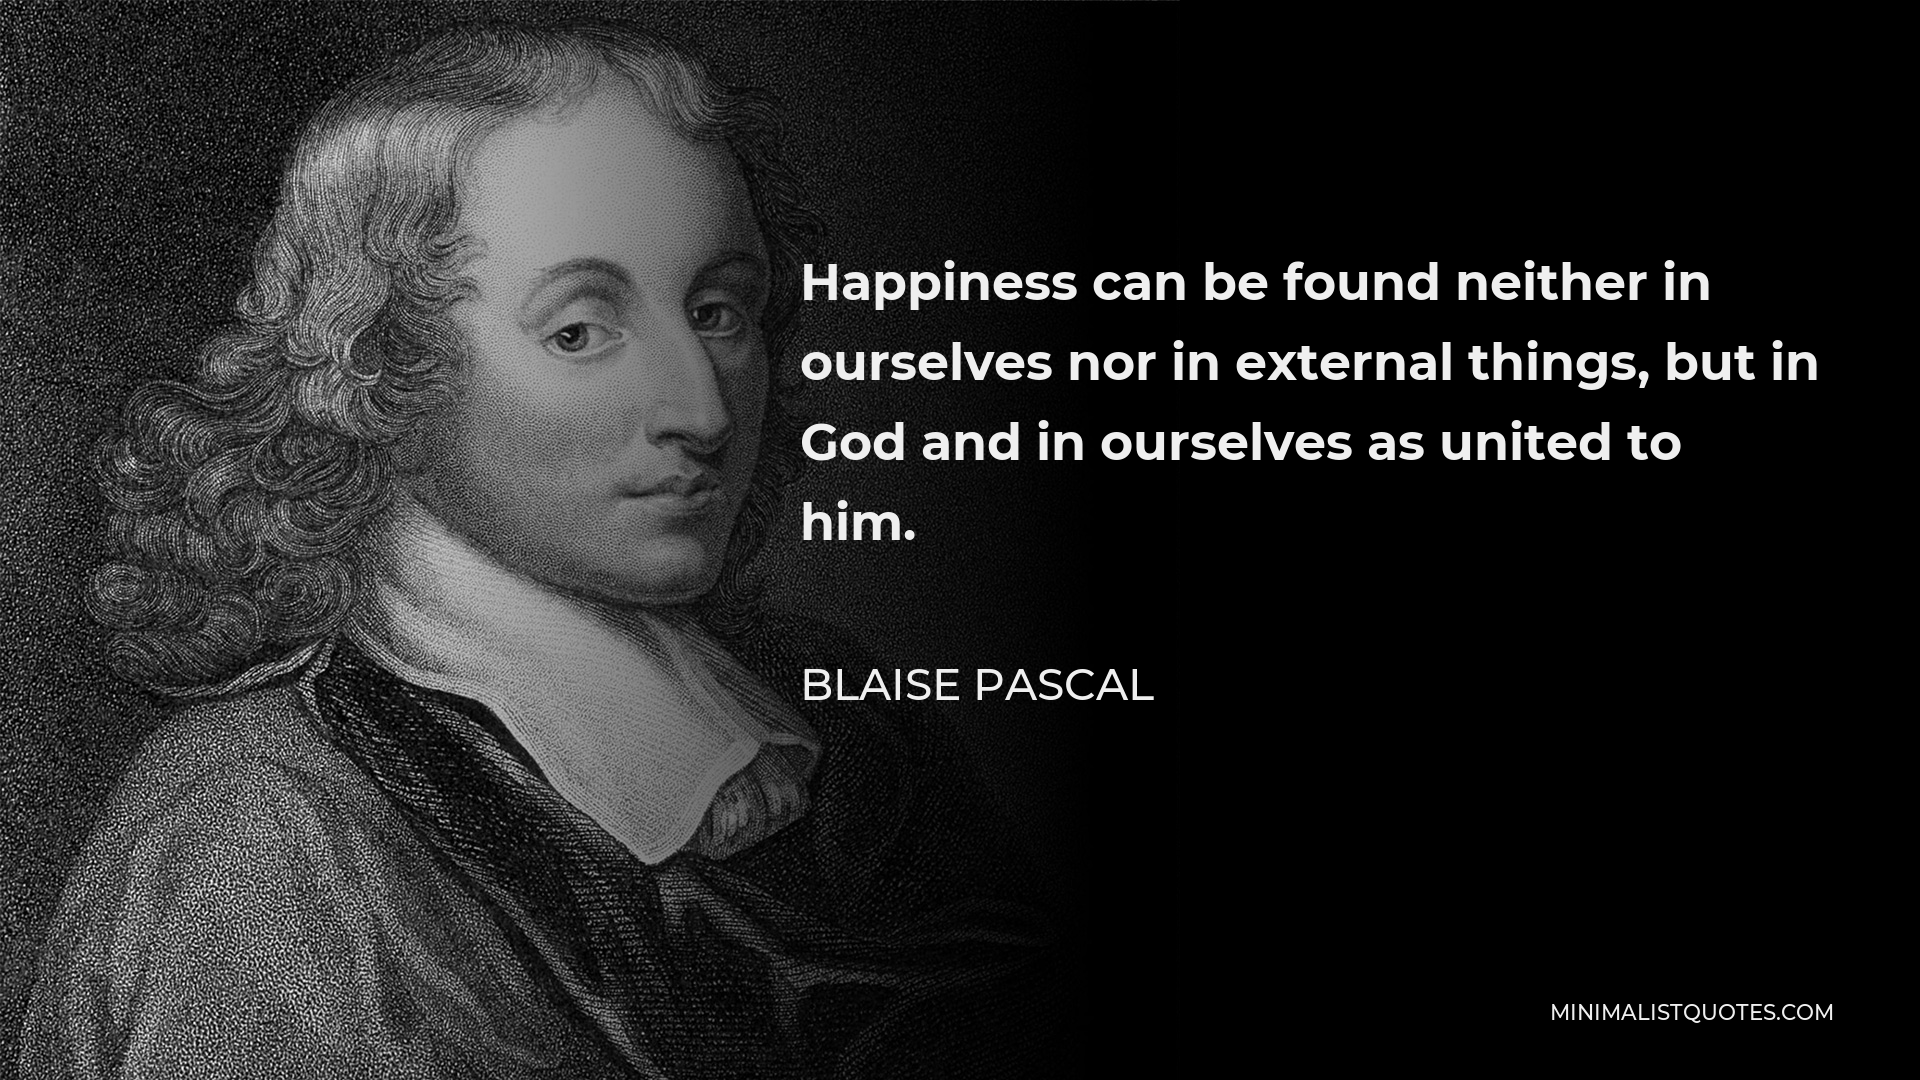 Blaise Pascal Quote - Happiness can be found neither in ourselves nor in external things, but in God and in ourselves as united to him.